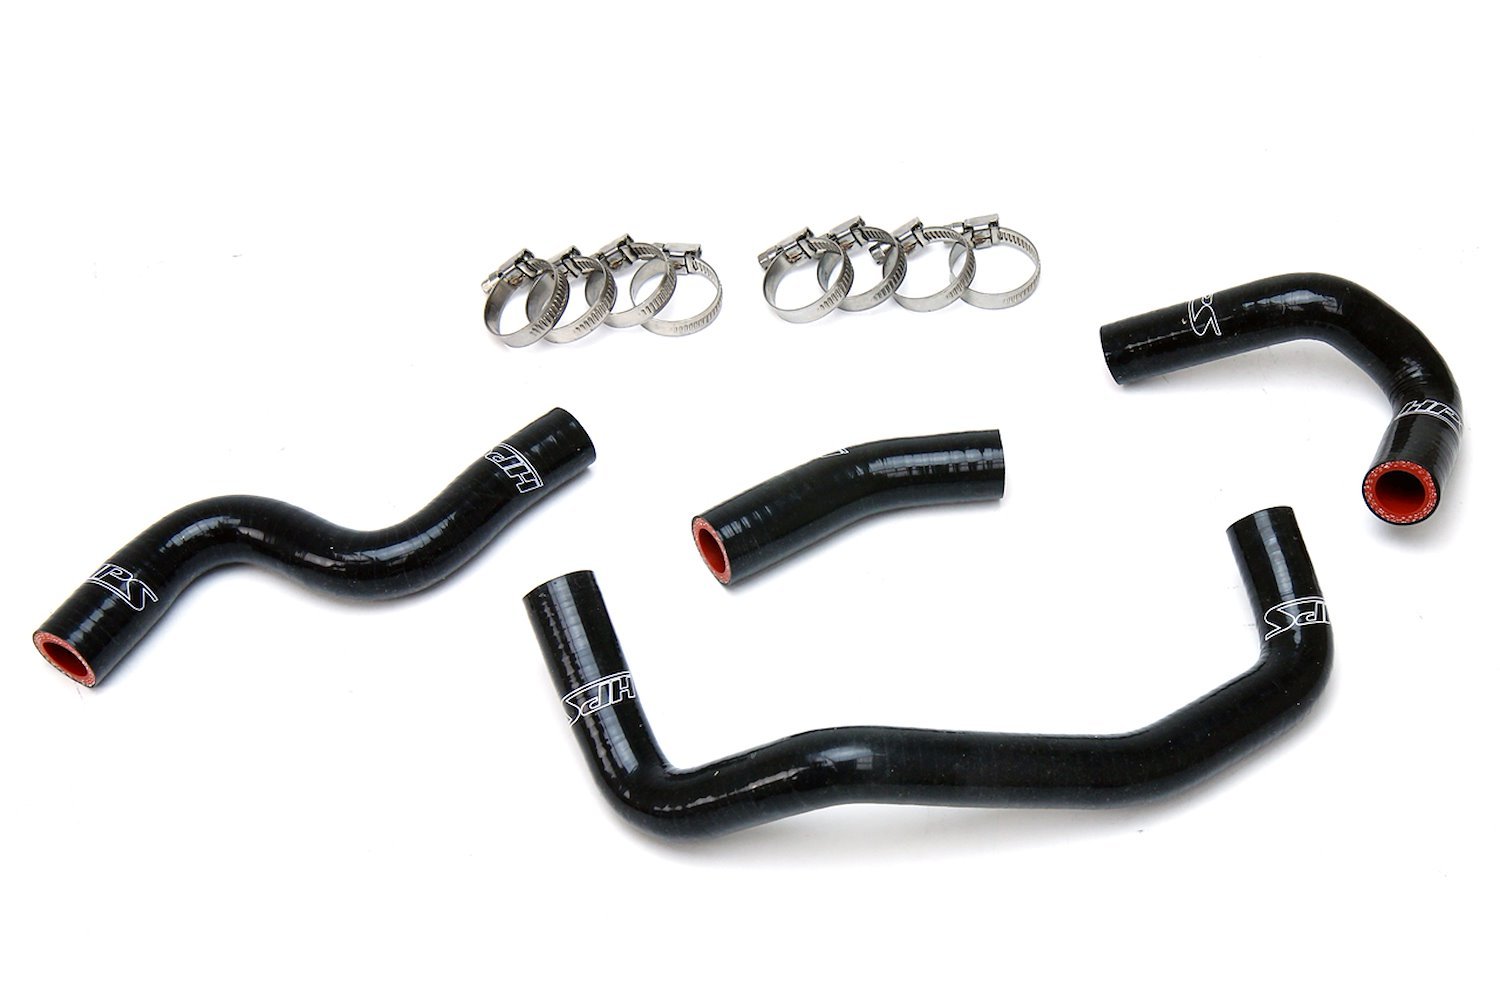 57-1508-BLK Heater Hose Kit, High-Temp 3-Ply Reinforced Silicone, Replace OEM Rubber Heater Coolant Hoses